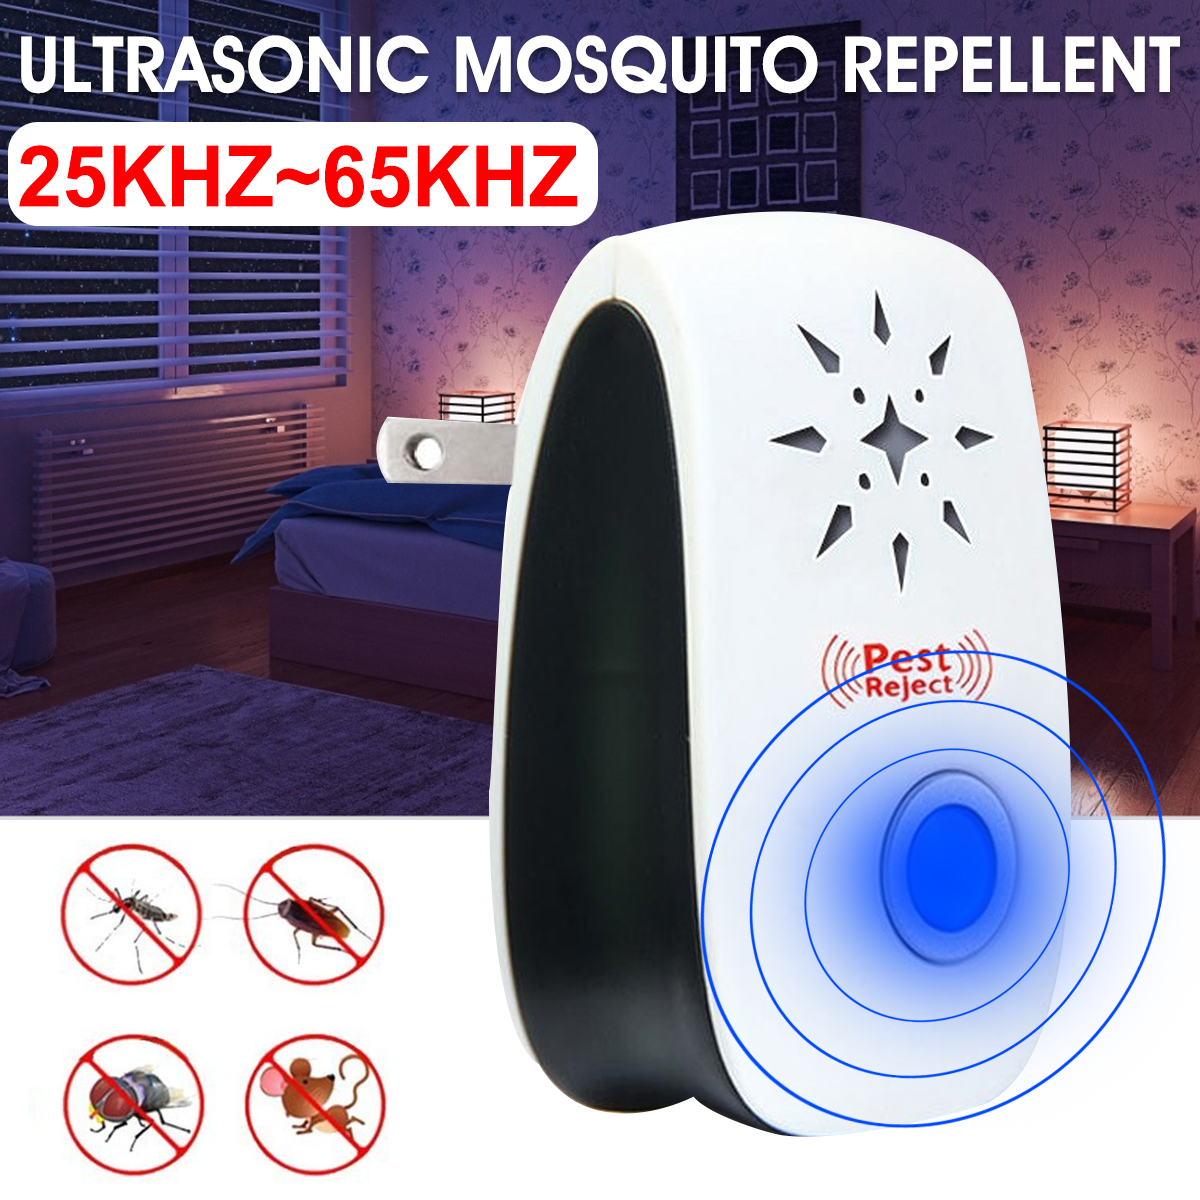 Ultrasonic-Mosquito-Repellent-Mosquito-Double-Horn-Mouse-Cockroach-Flea-Killer-1851125-1